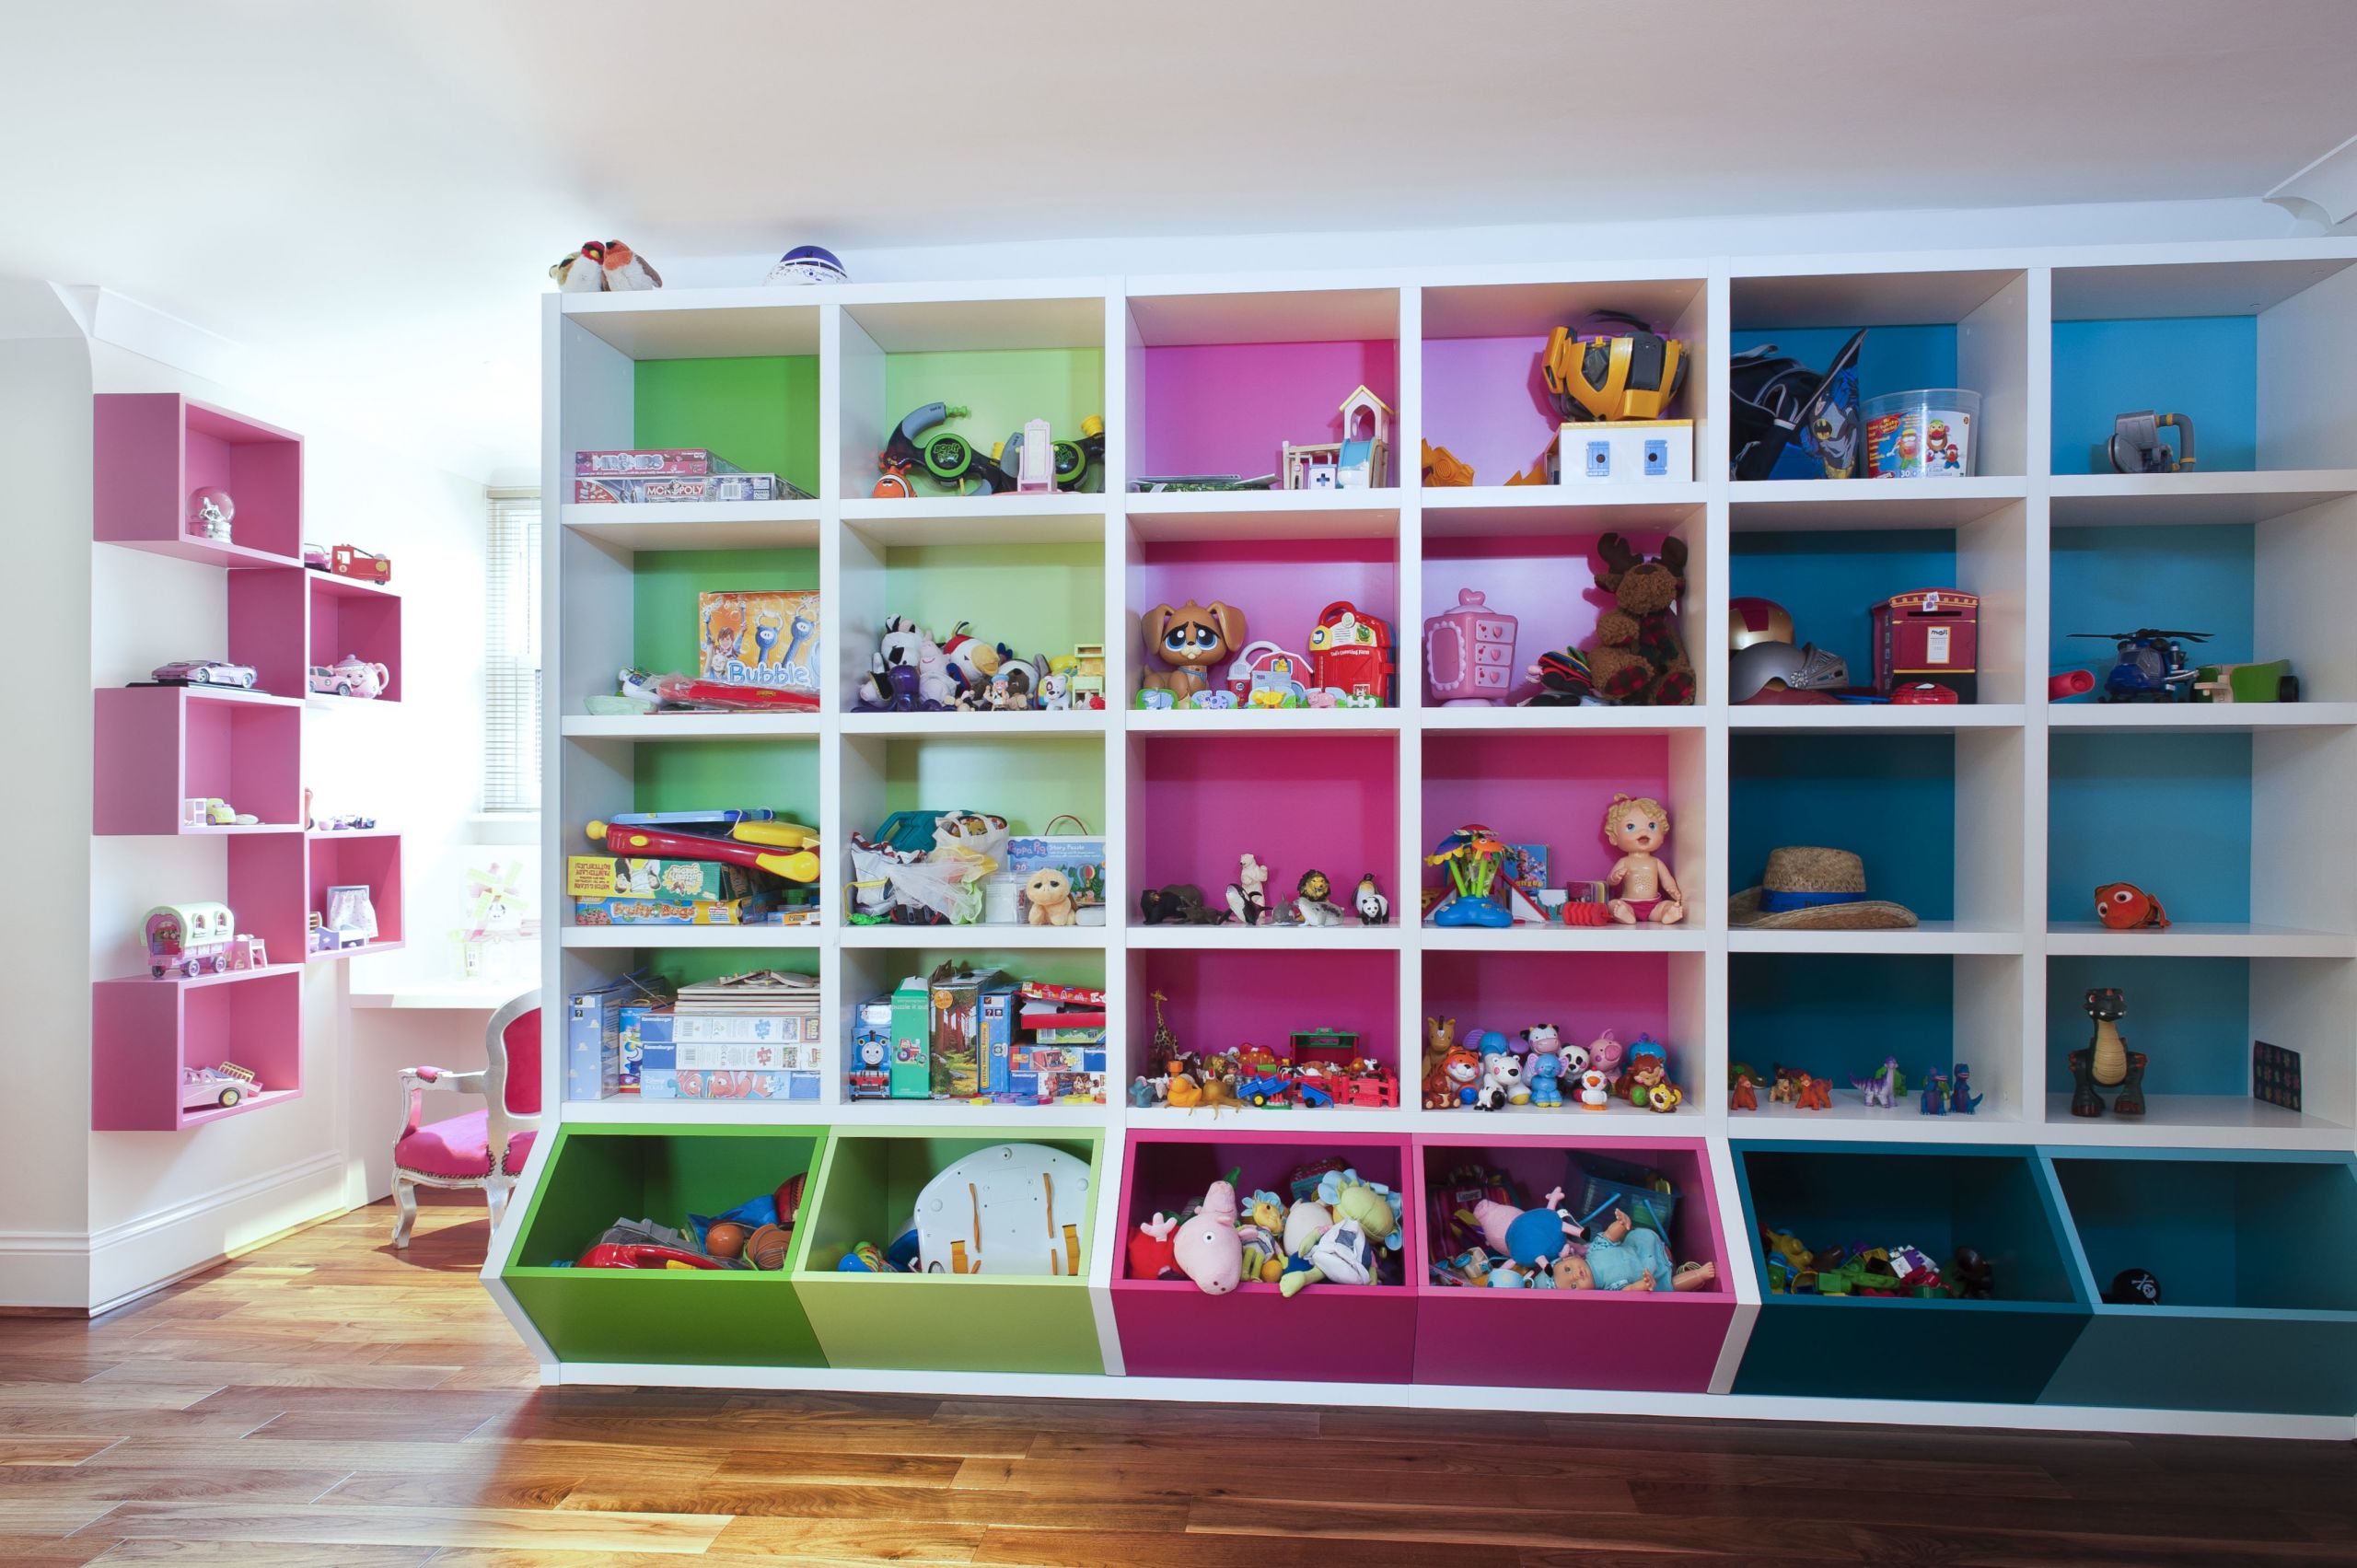 Childrens Storage Furniture
 How to Plan a Child s Space That Will Evolve As They Grow